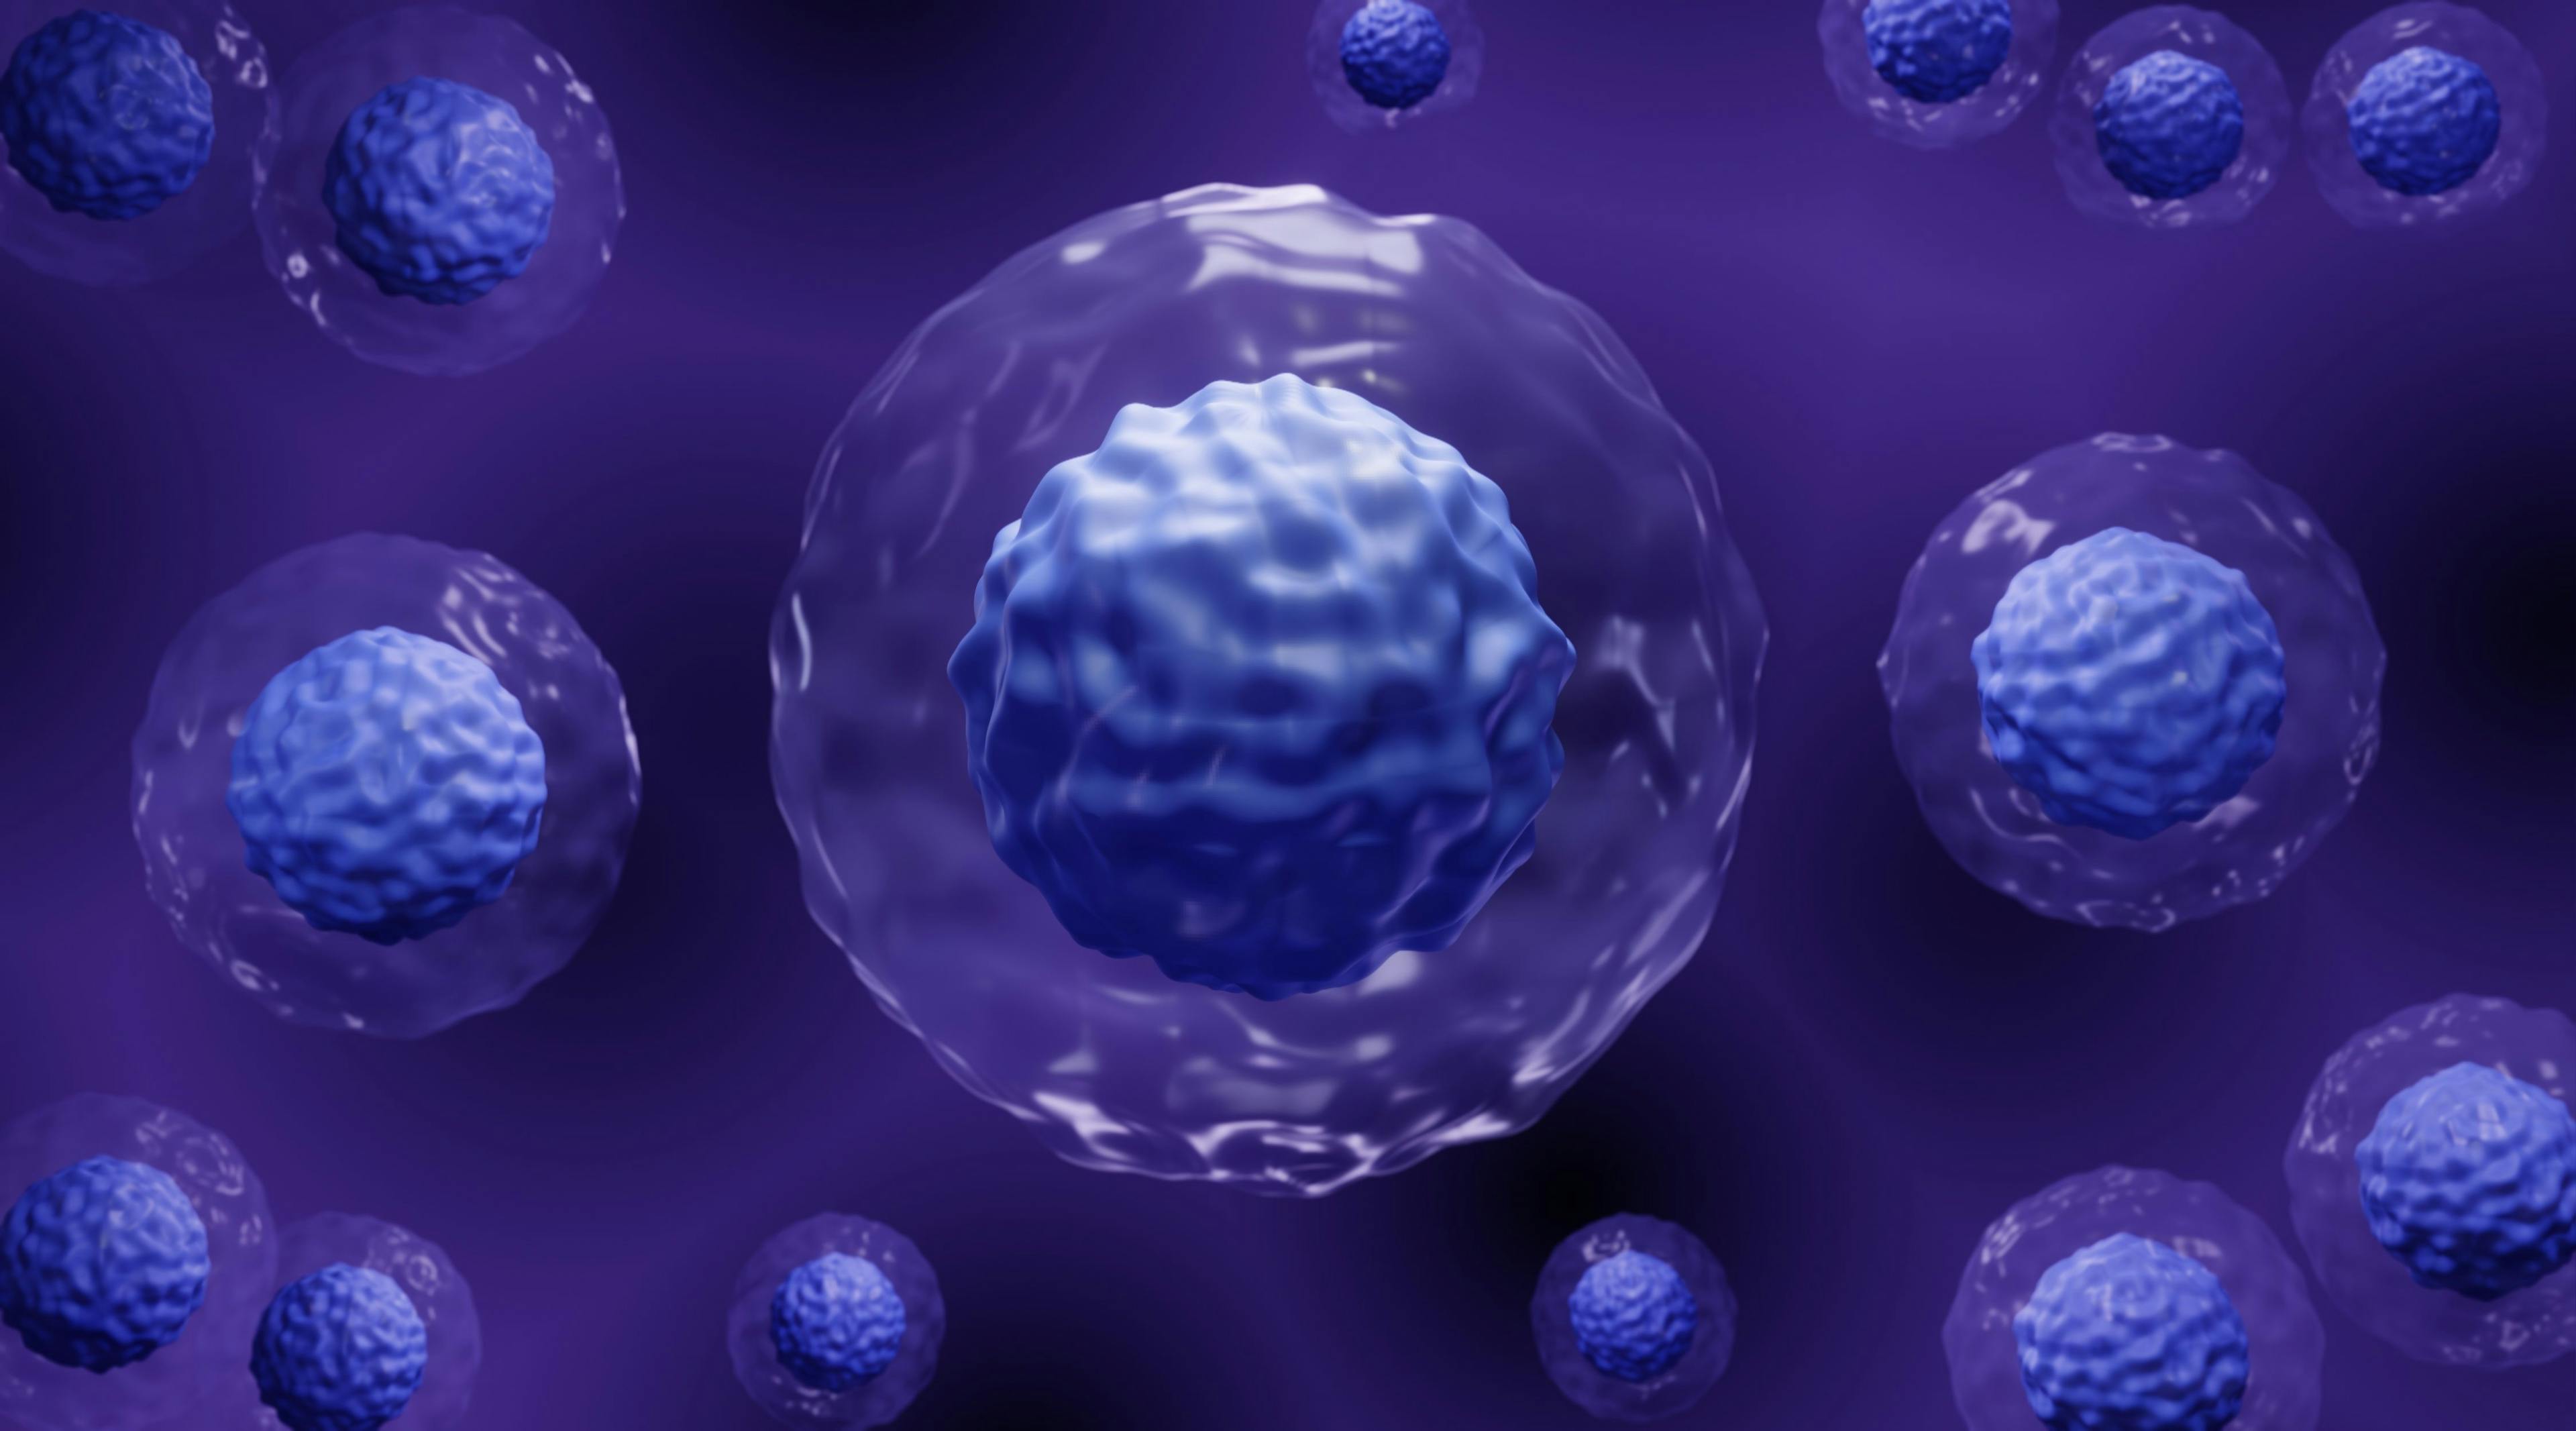 Embryonic stem cells therapy, hematopoietic stem cell transplantation  Image Credit: Artur - www.stock.adobe.com